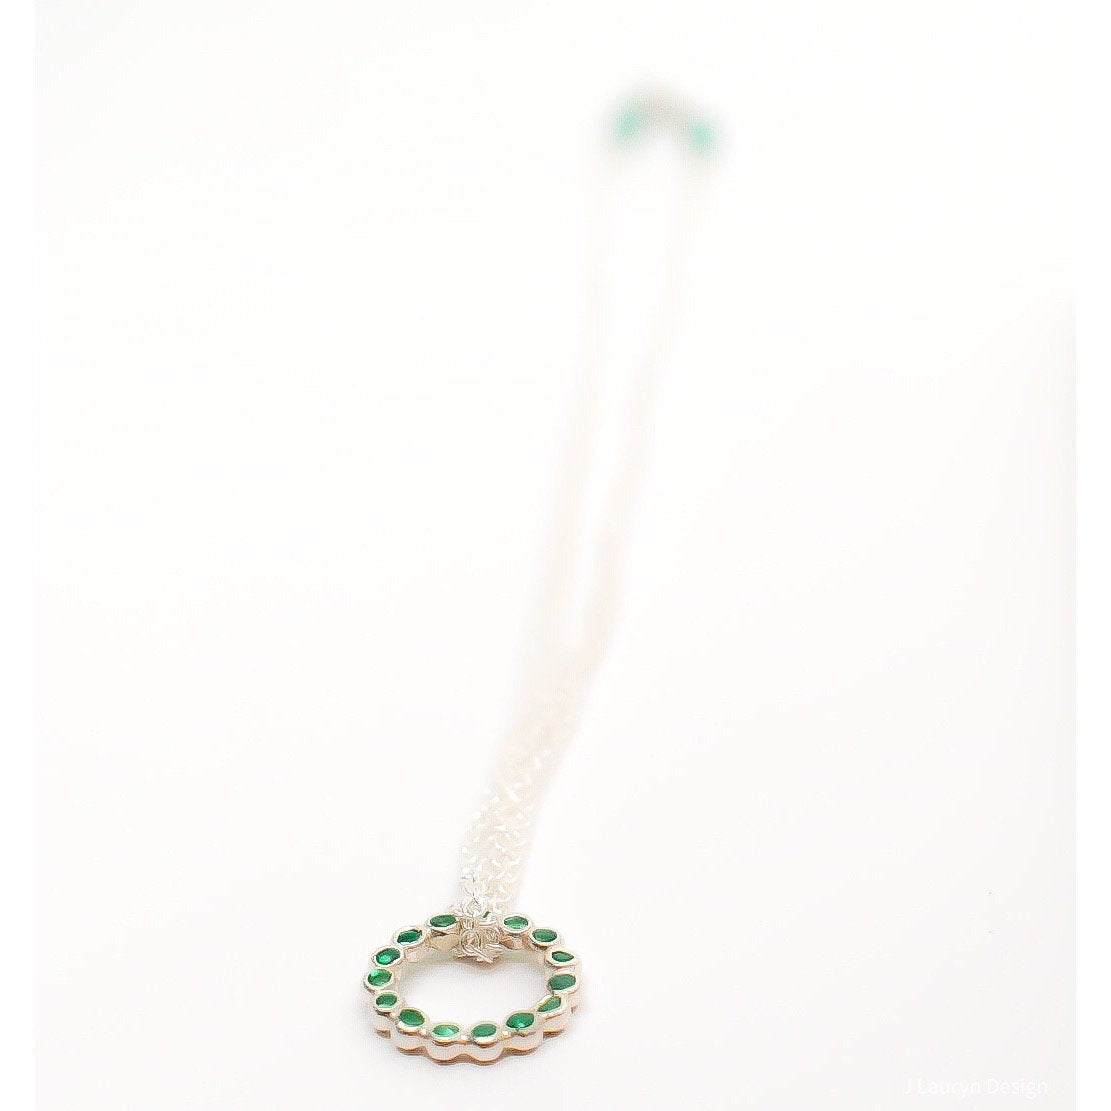 Green Emerald Circle Forever More Infinity Bracelet Pendant Endless Circle Emerald Silver Gold Necklace